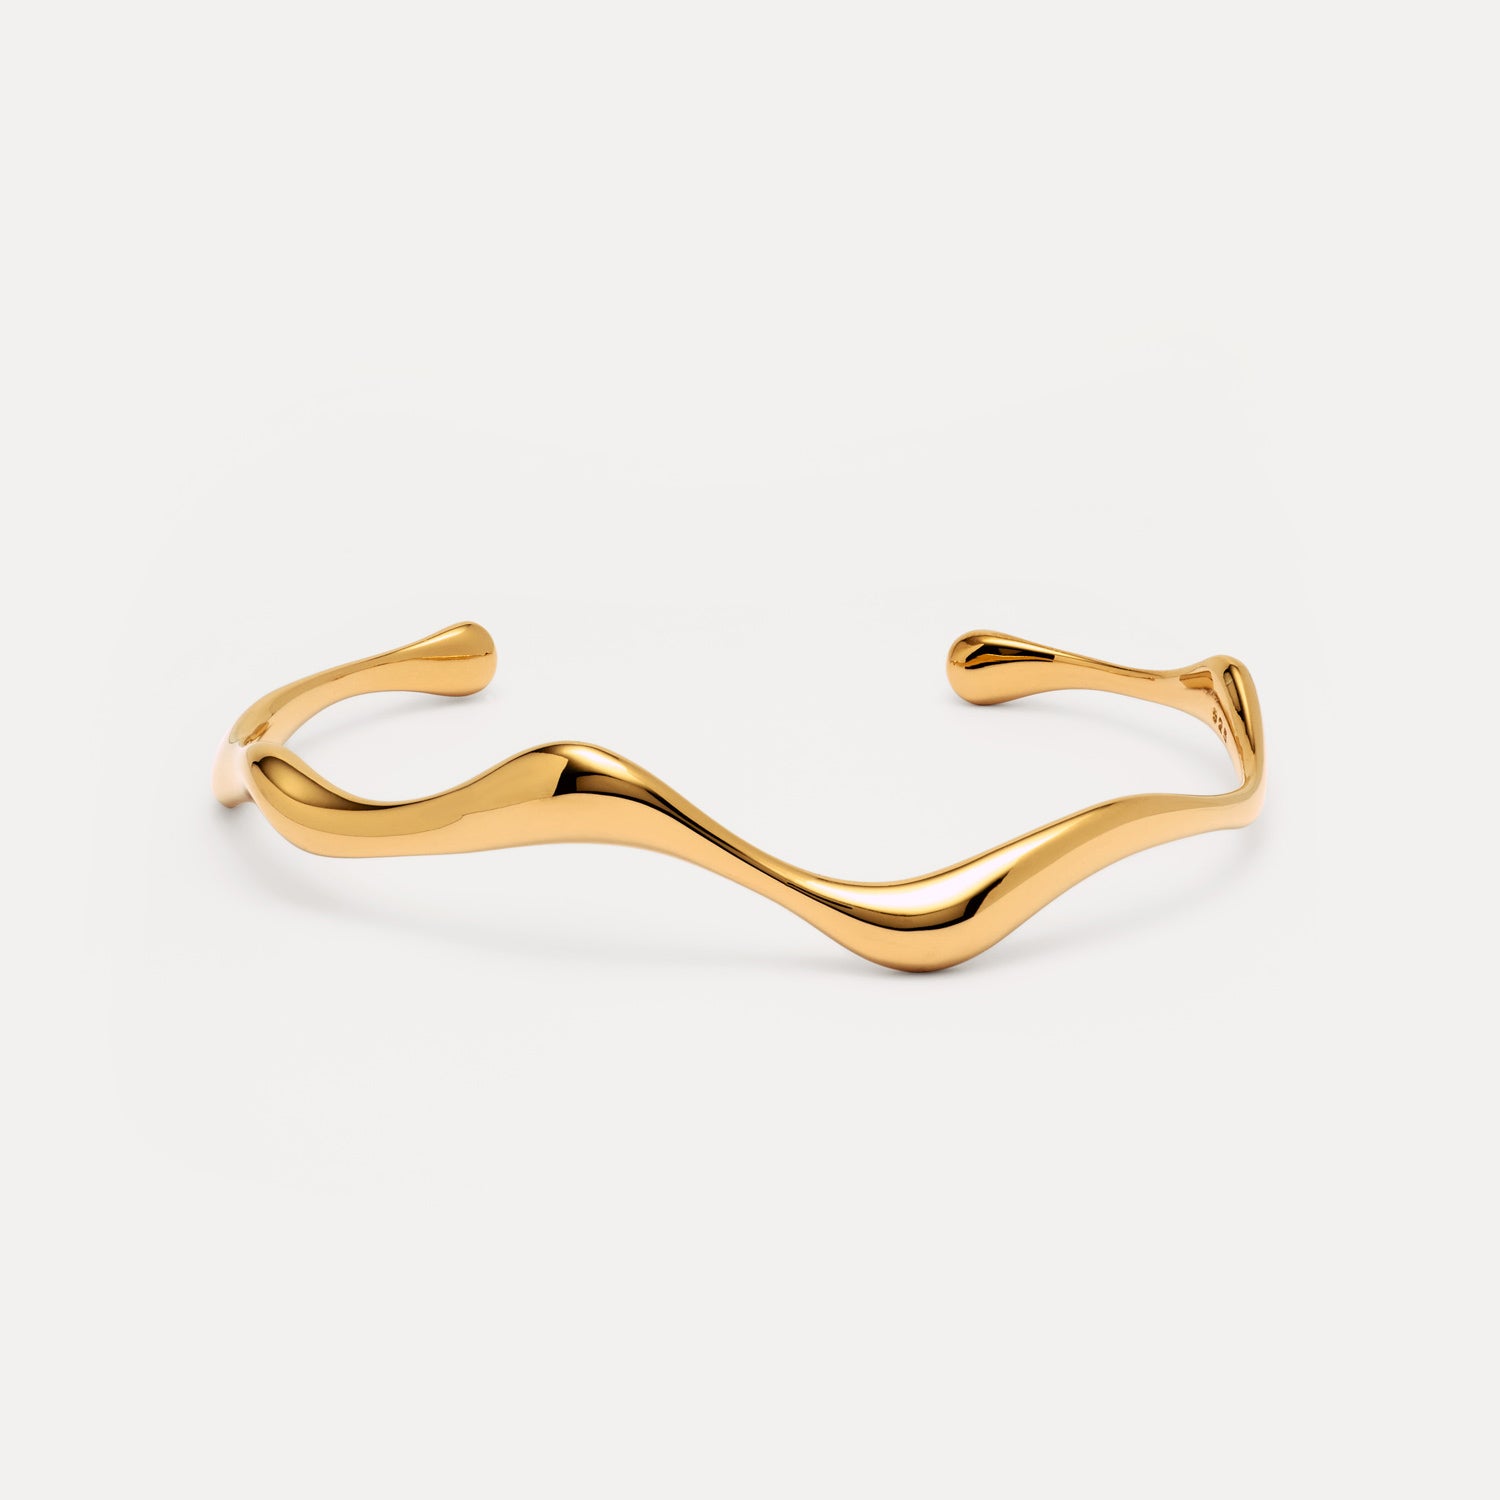 Poise Wave Cuff Bangle, recycled 18k Gold Vermeil - VEYIA Berlin